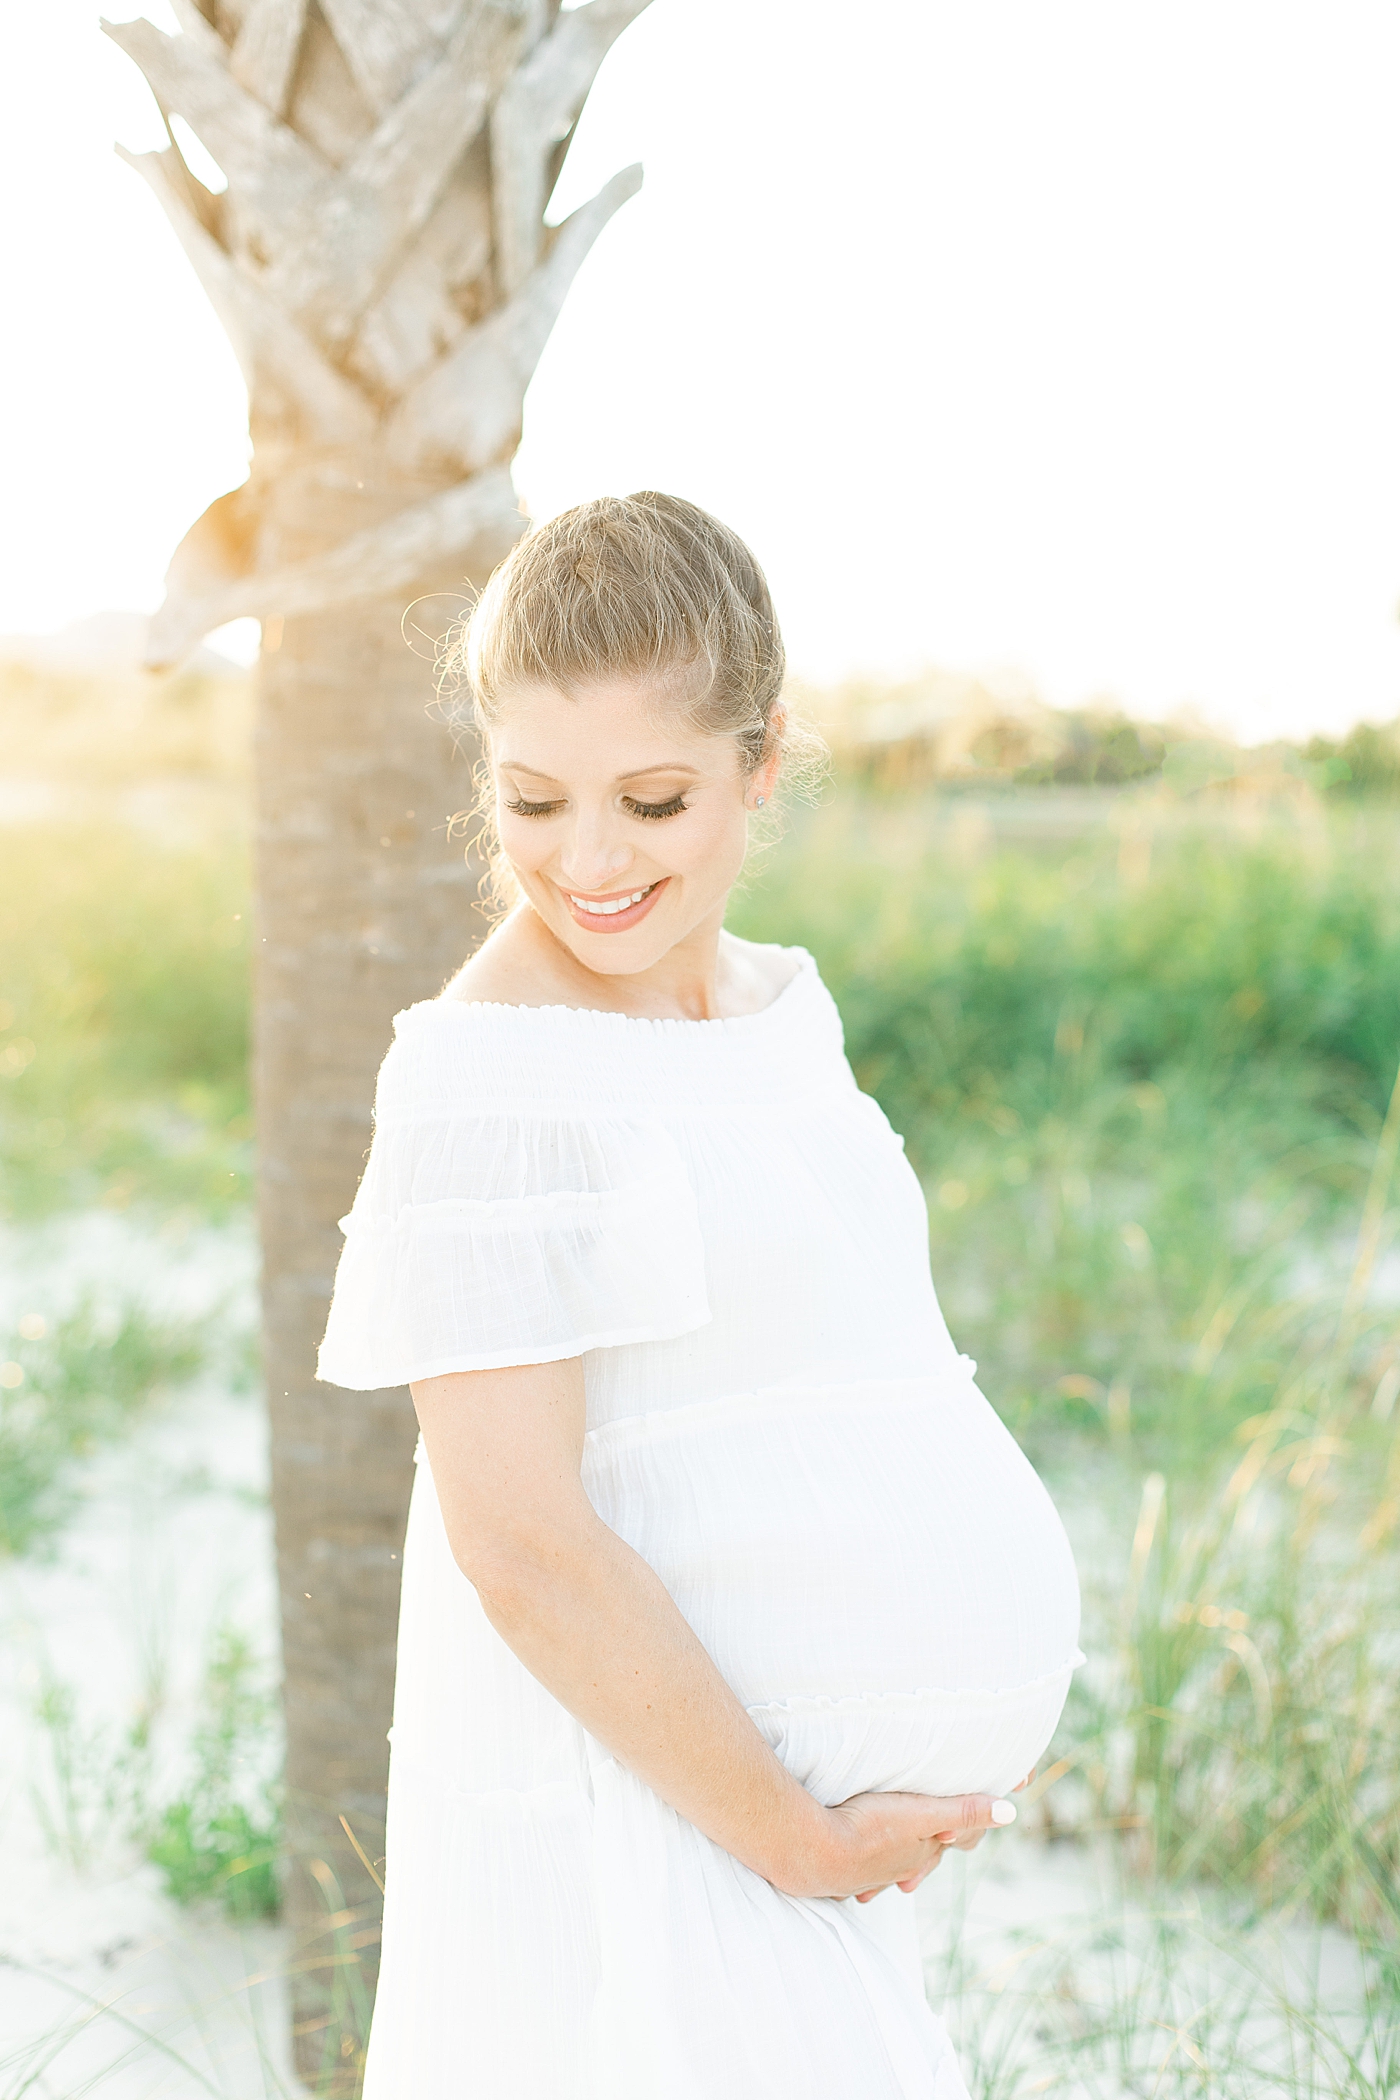 Expectant mother photos on the beach. Photo by Little Sunshine Photography.